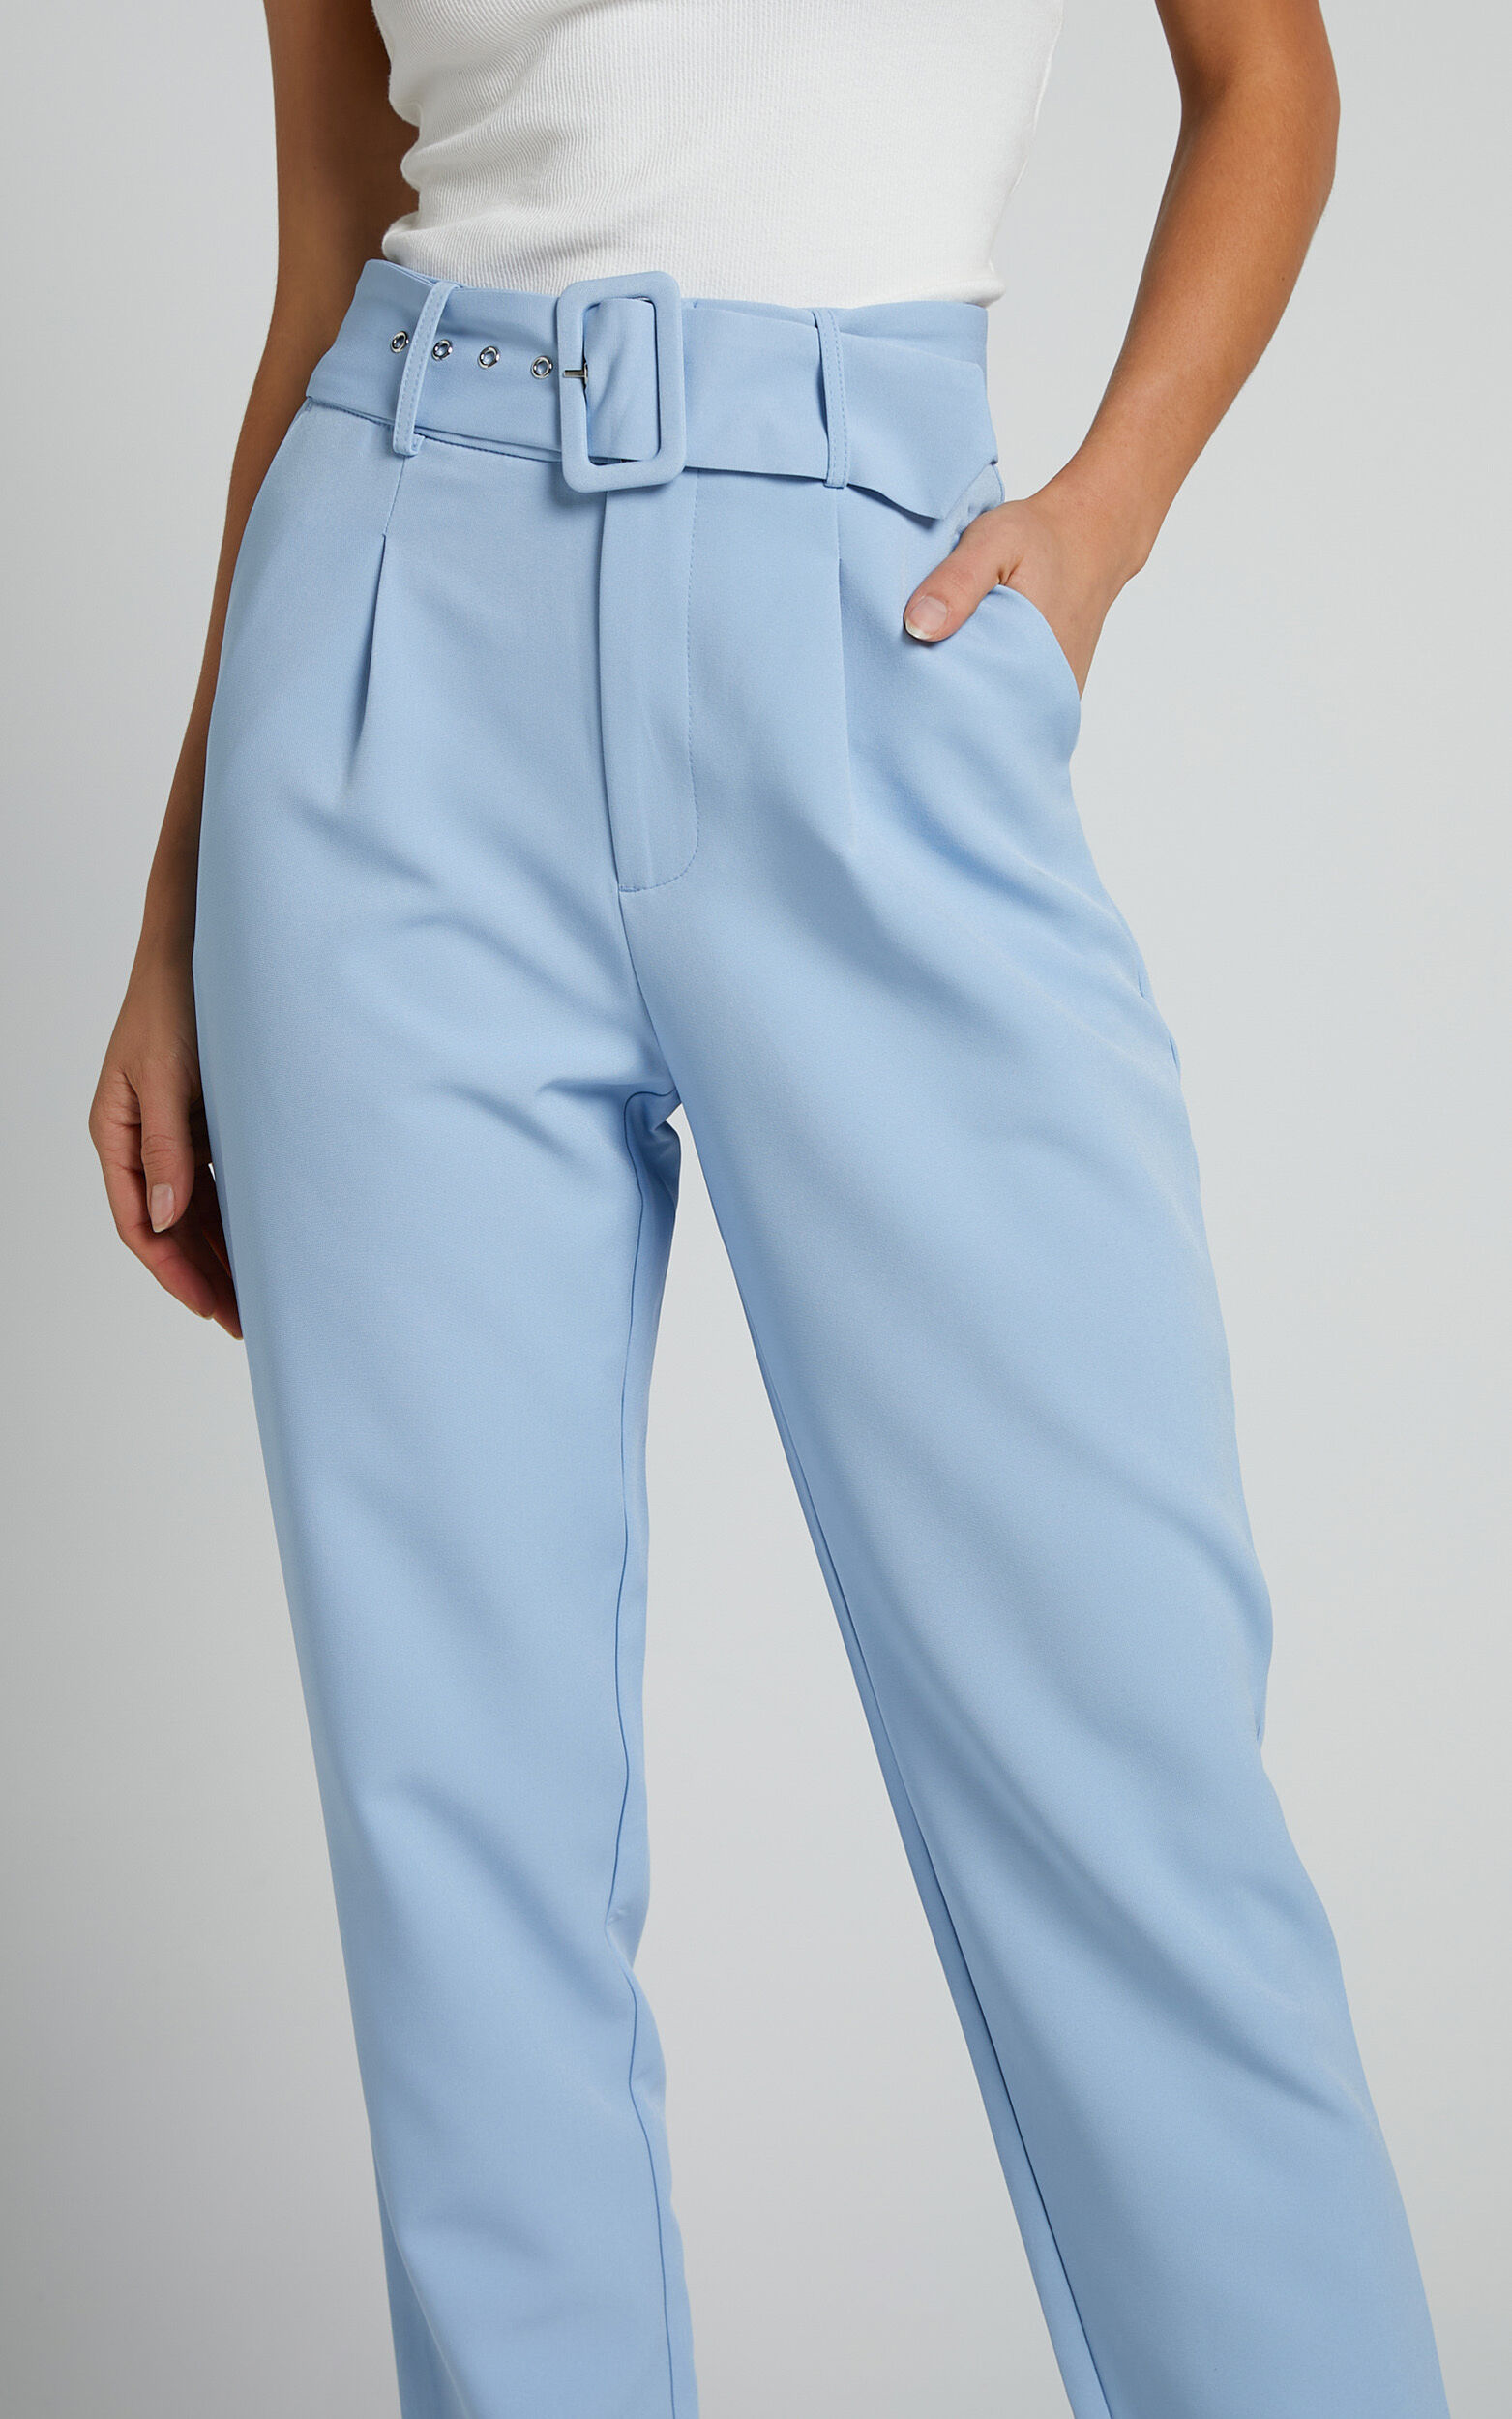 Milica Trousers - Belted High Waisted Trousers in Pastel Blue | Showpo USA